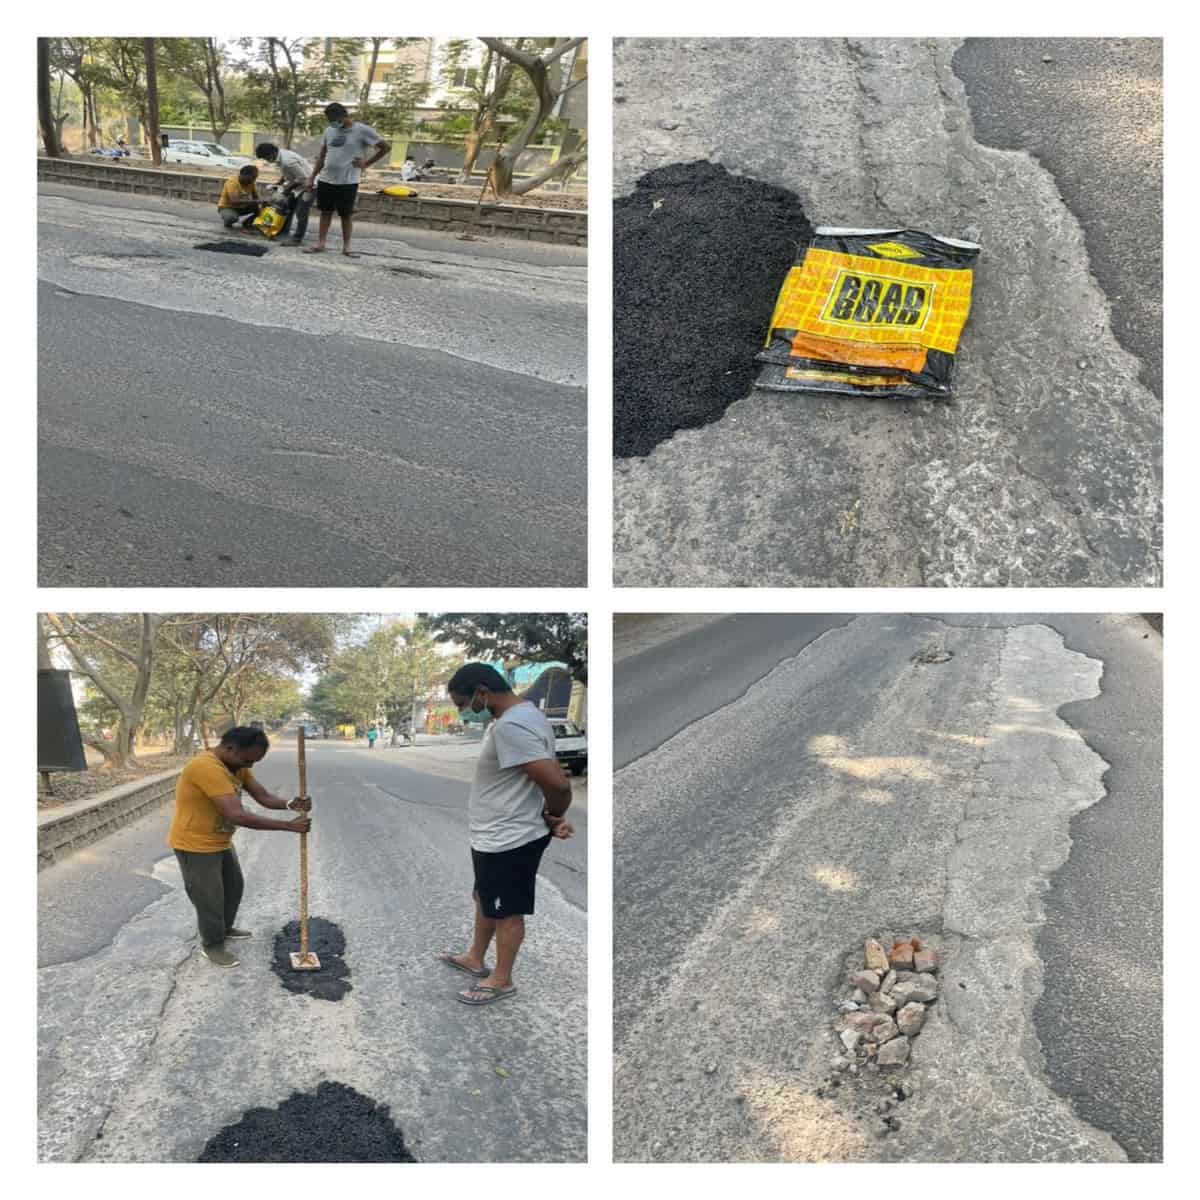 Hyderabad: With official neglect, activists take charge to repair potholes